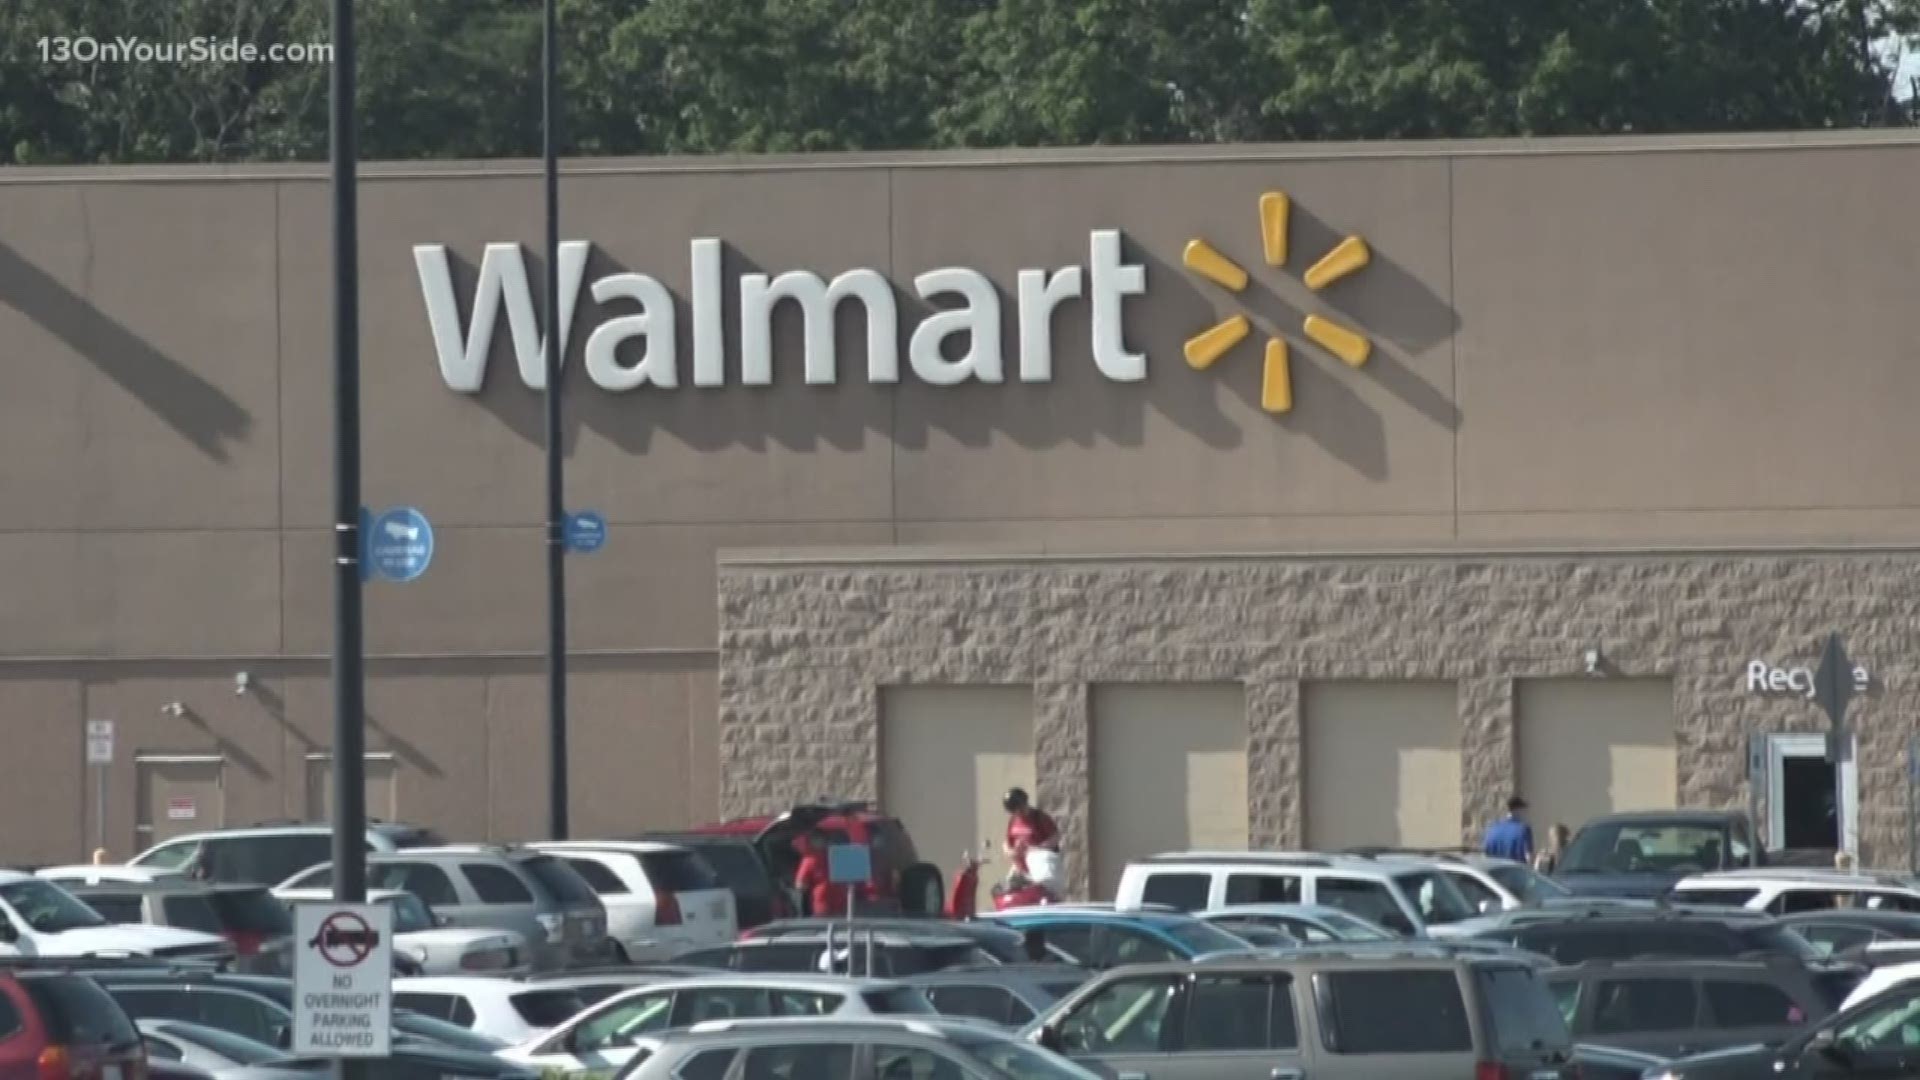 Shuttle service that transported seniors to Walmart has ended